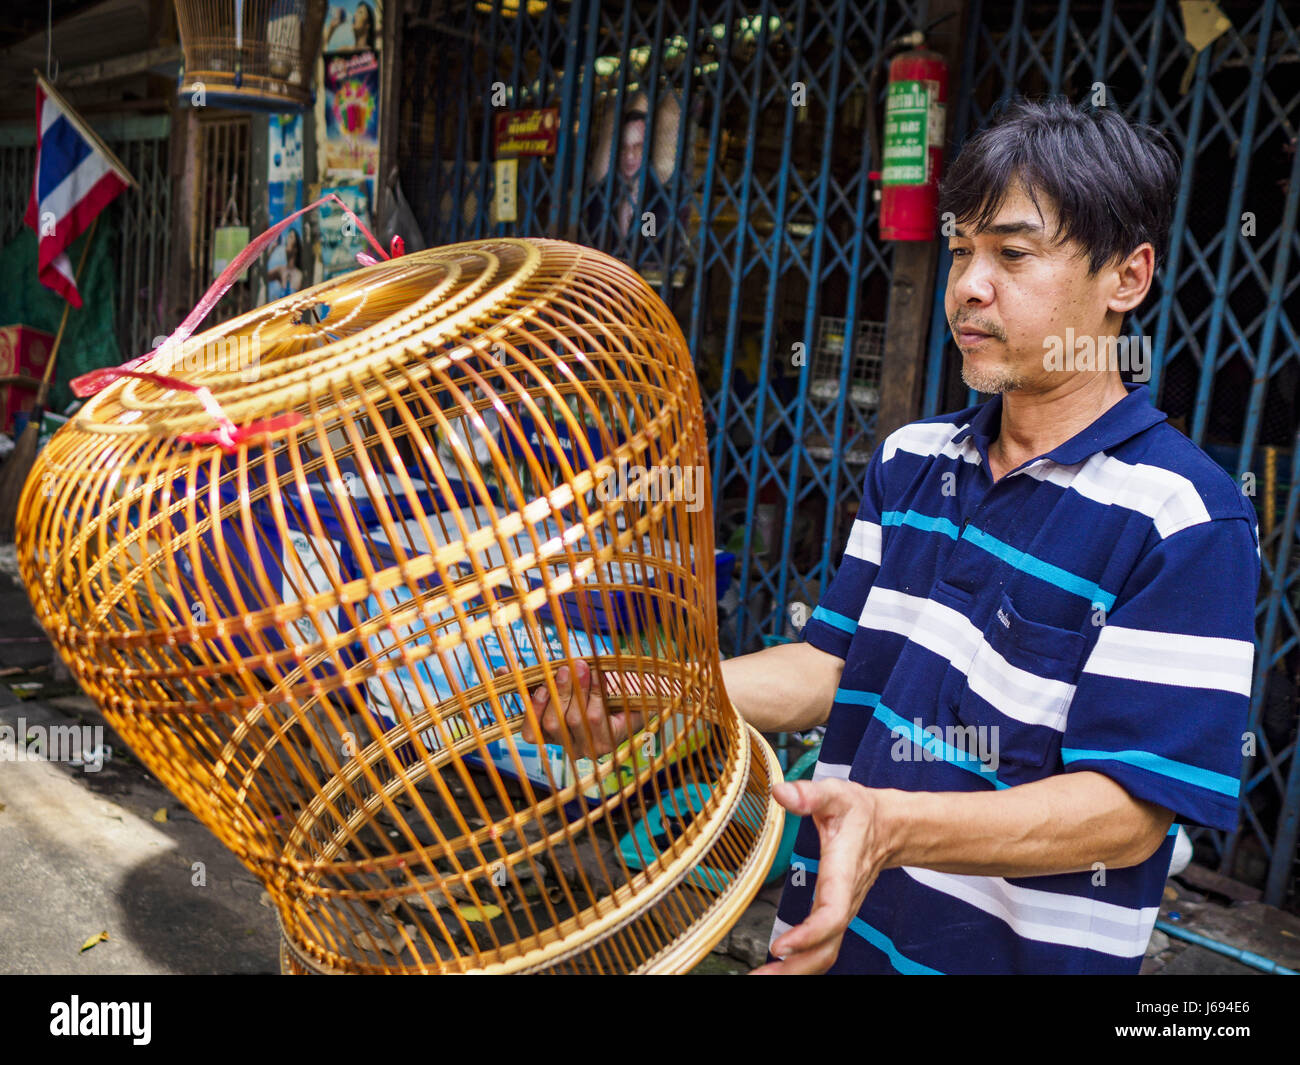 May 16, 2017 - Bangkok, Bangkok, Thailand - SARAYUT NIBLAI, who makes and repairs birdcages, says he is the third generation of his family to live in the Pom Mahakan slum. He is varnishing a bird cage he made in his home workshop. The final evictions of the remaining families in Pom Mahakan, a slum community in a 19th century fort in Bangkok, have started. City officials are moving the residents out of the fort. NGOs and historic preservation organizations protested the city's action but city officials did not relent and started evicting the remaining families in early March. (Credit Image: © Stock Photo